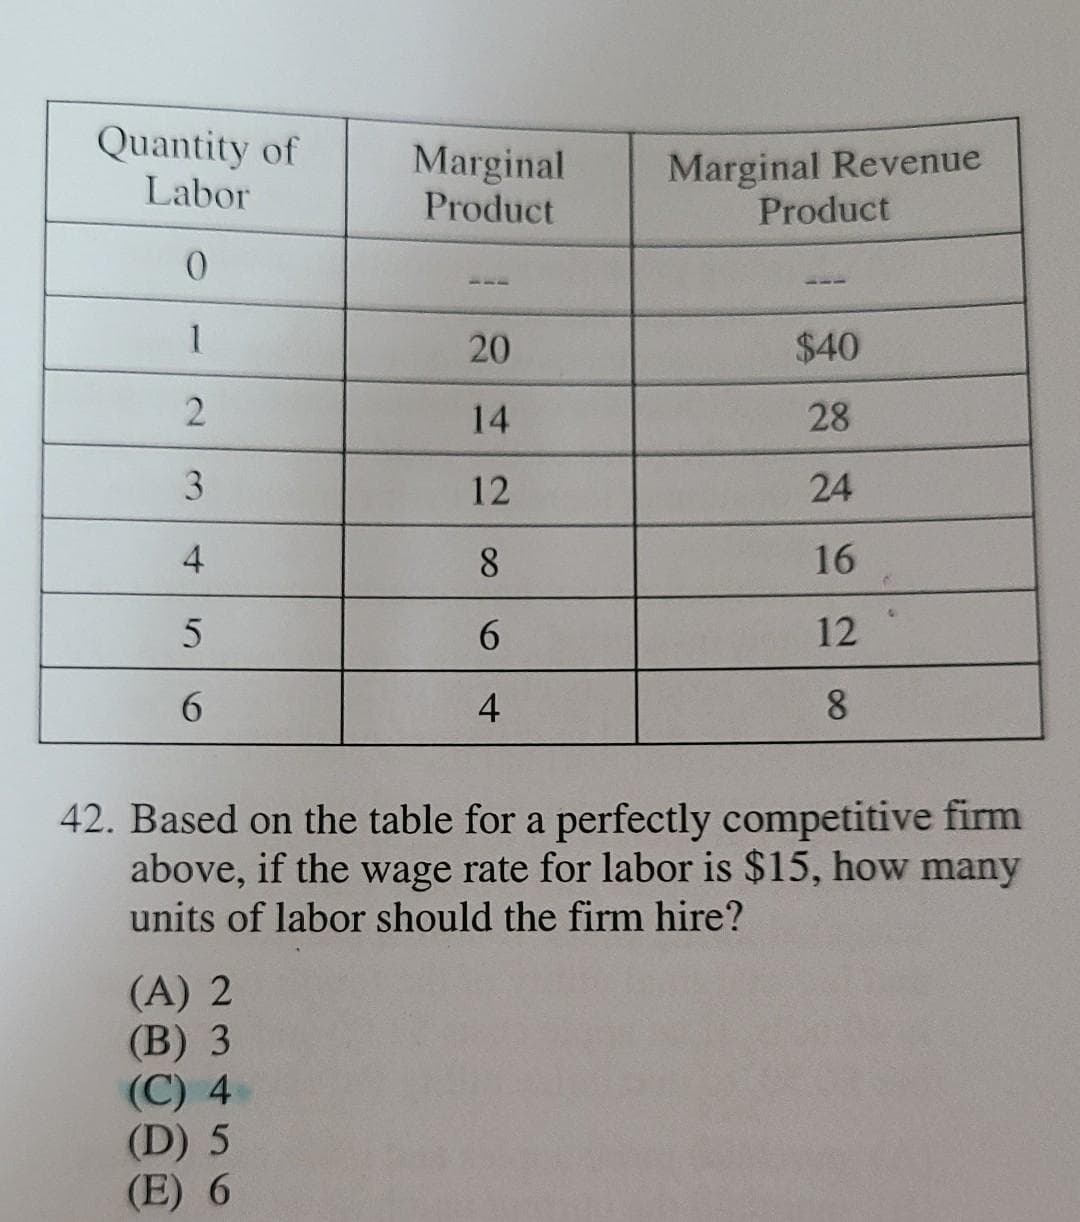 Quantity of
Labor
Marginal
Product
Marginal Revenue
Product
1
20
$40
14
28
3
12
24
4
8.
16
6.
12
6.
4
8
42. Based on the table for a perfectly competitive firm
above, if the wage rate for labor is $15, how many
units of labor should the firm hire?
(A) 2
(B) 3
(С) 4
(D) 5
(E) 6
2.
